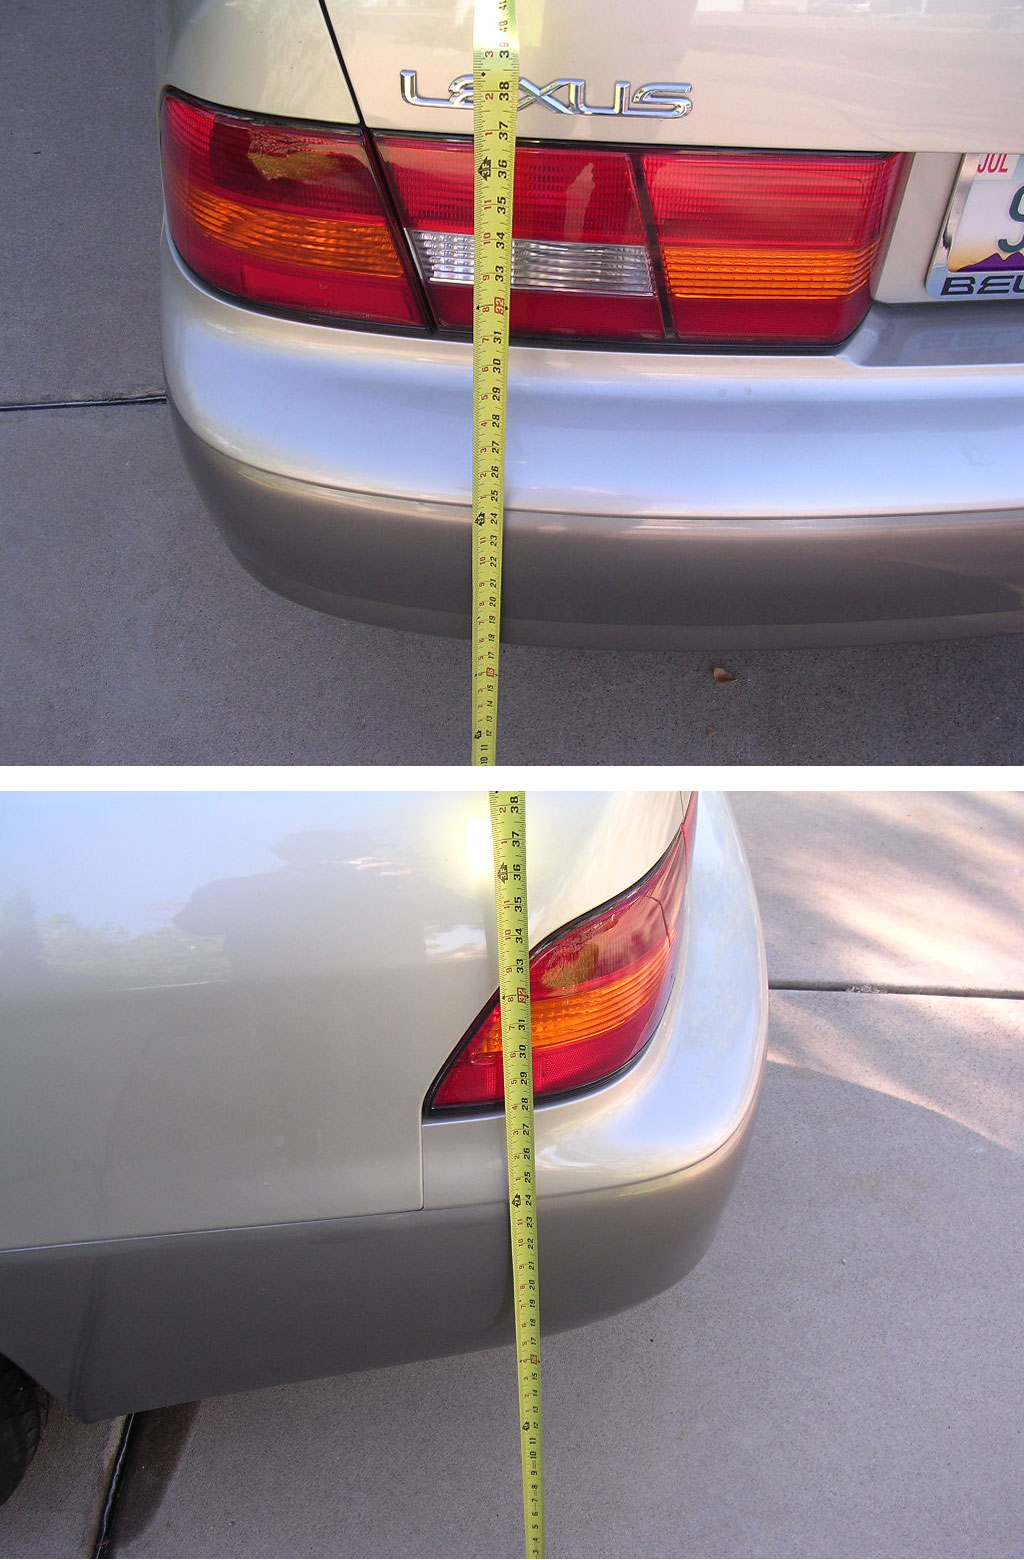 Example of deficient bumper photography and measurement for low velocity impact analysis